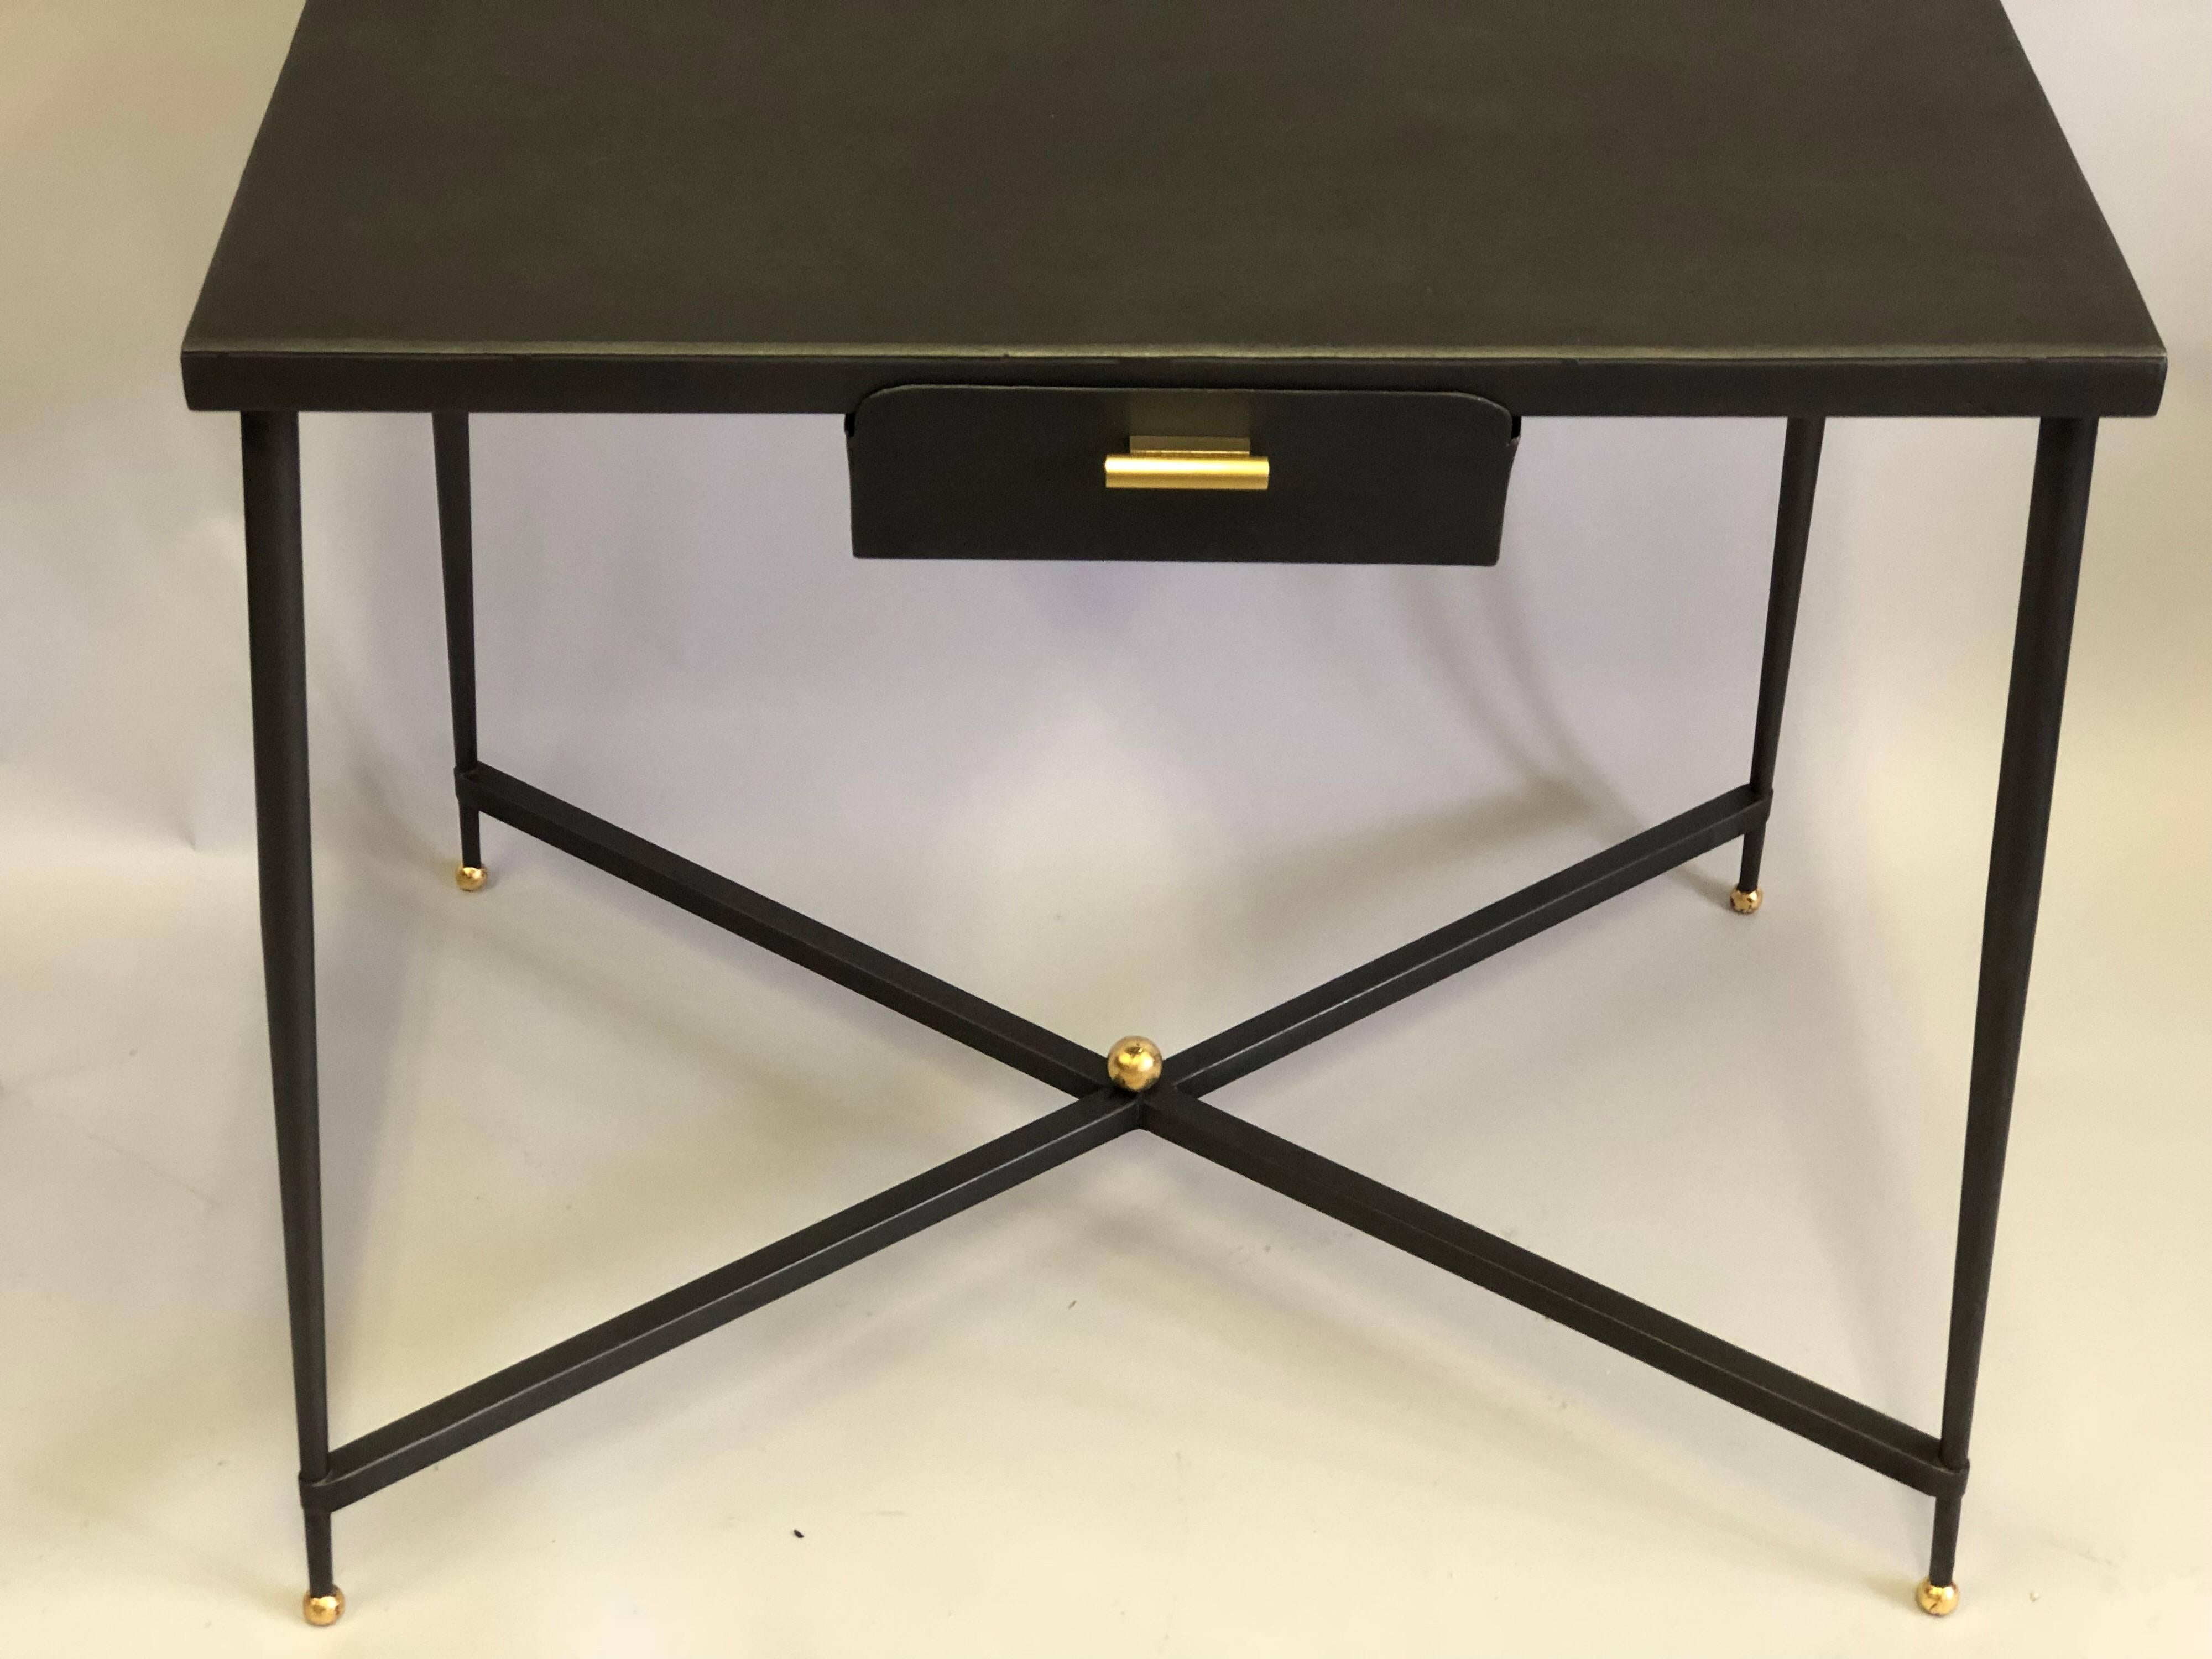 French Midcentury Steel and Brass Desk with Leather Desk Chair by Jacques Adnet 1